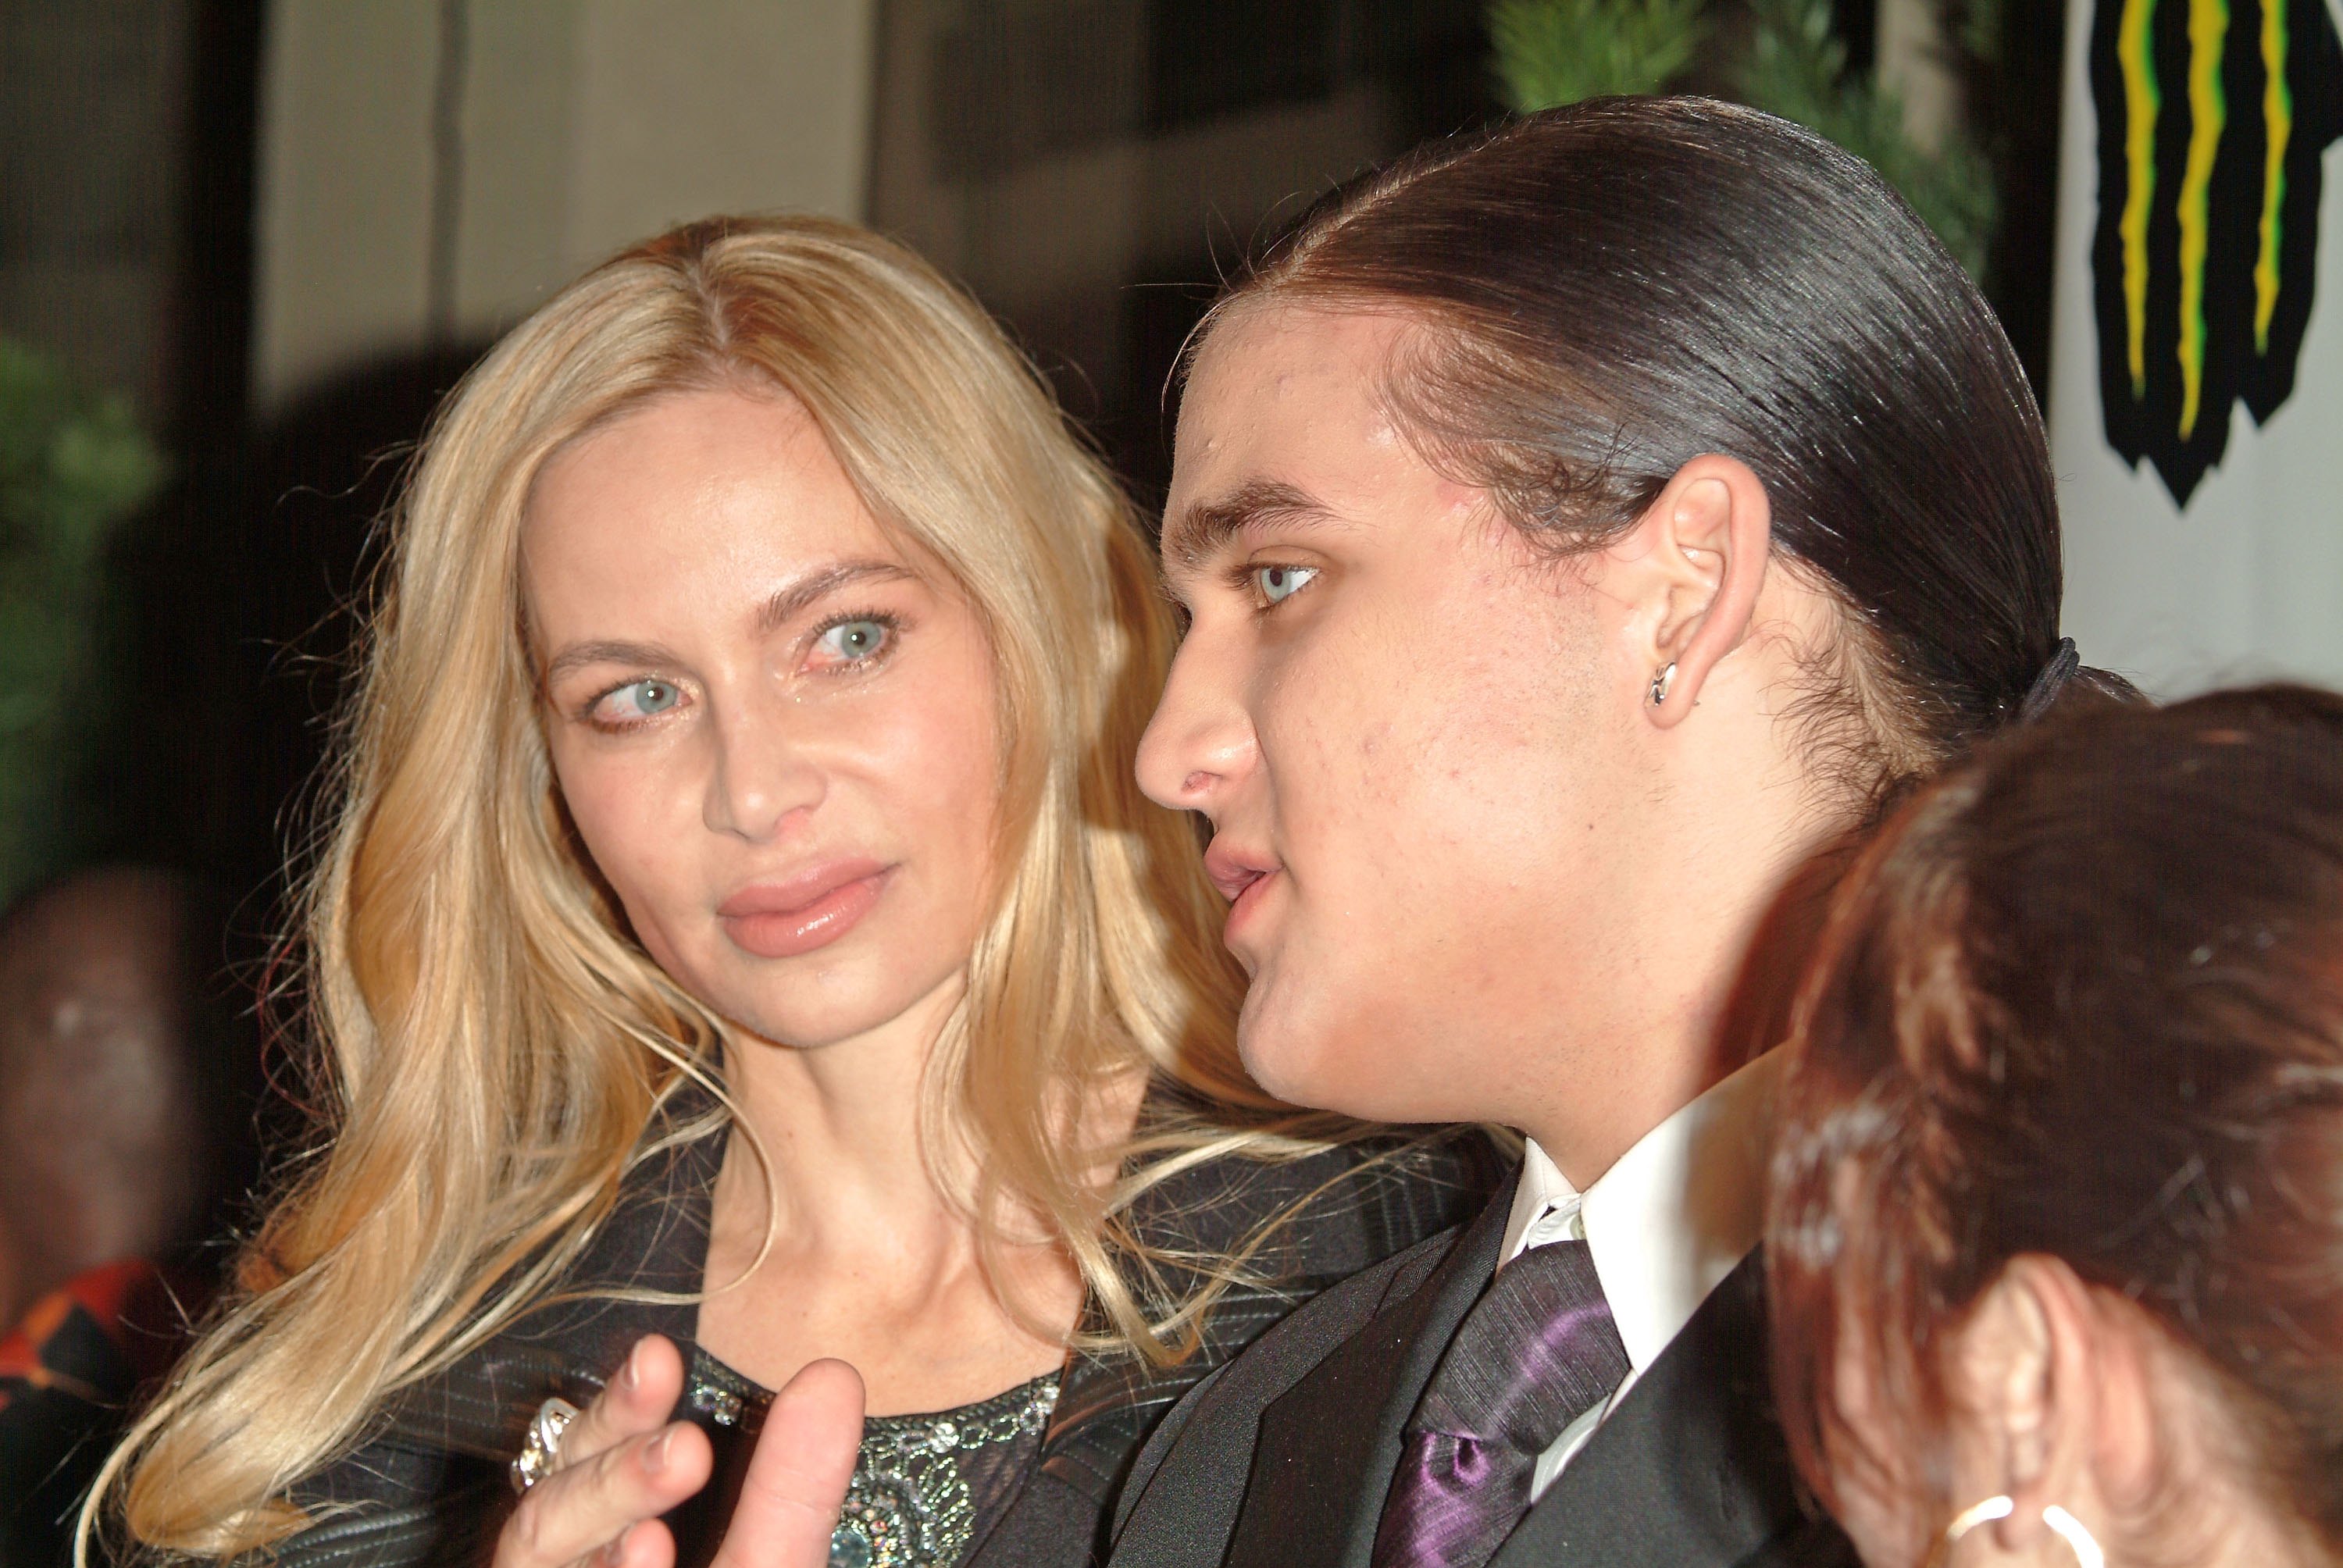 Christina Fulton and Weston Cage in Los Angeles in 2006 | Source: Getty Images